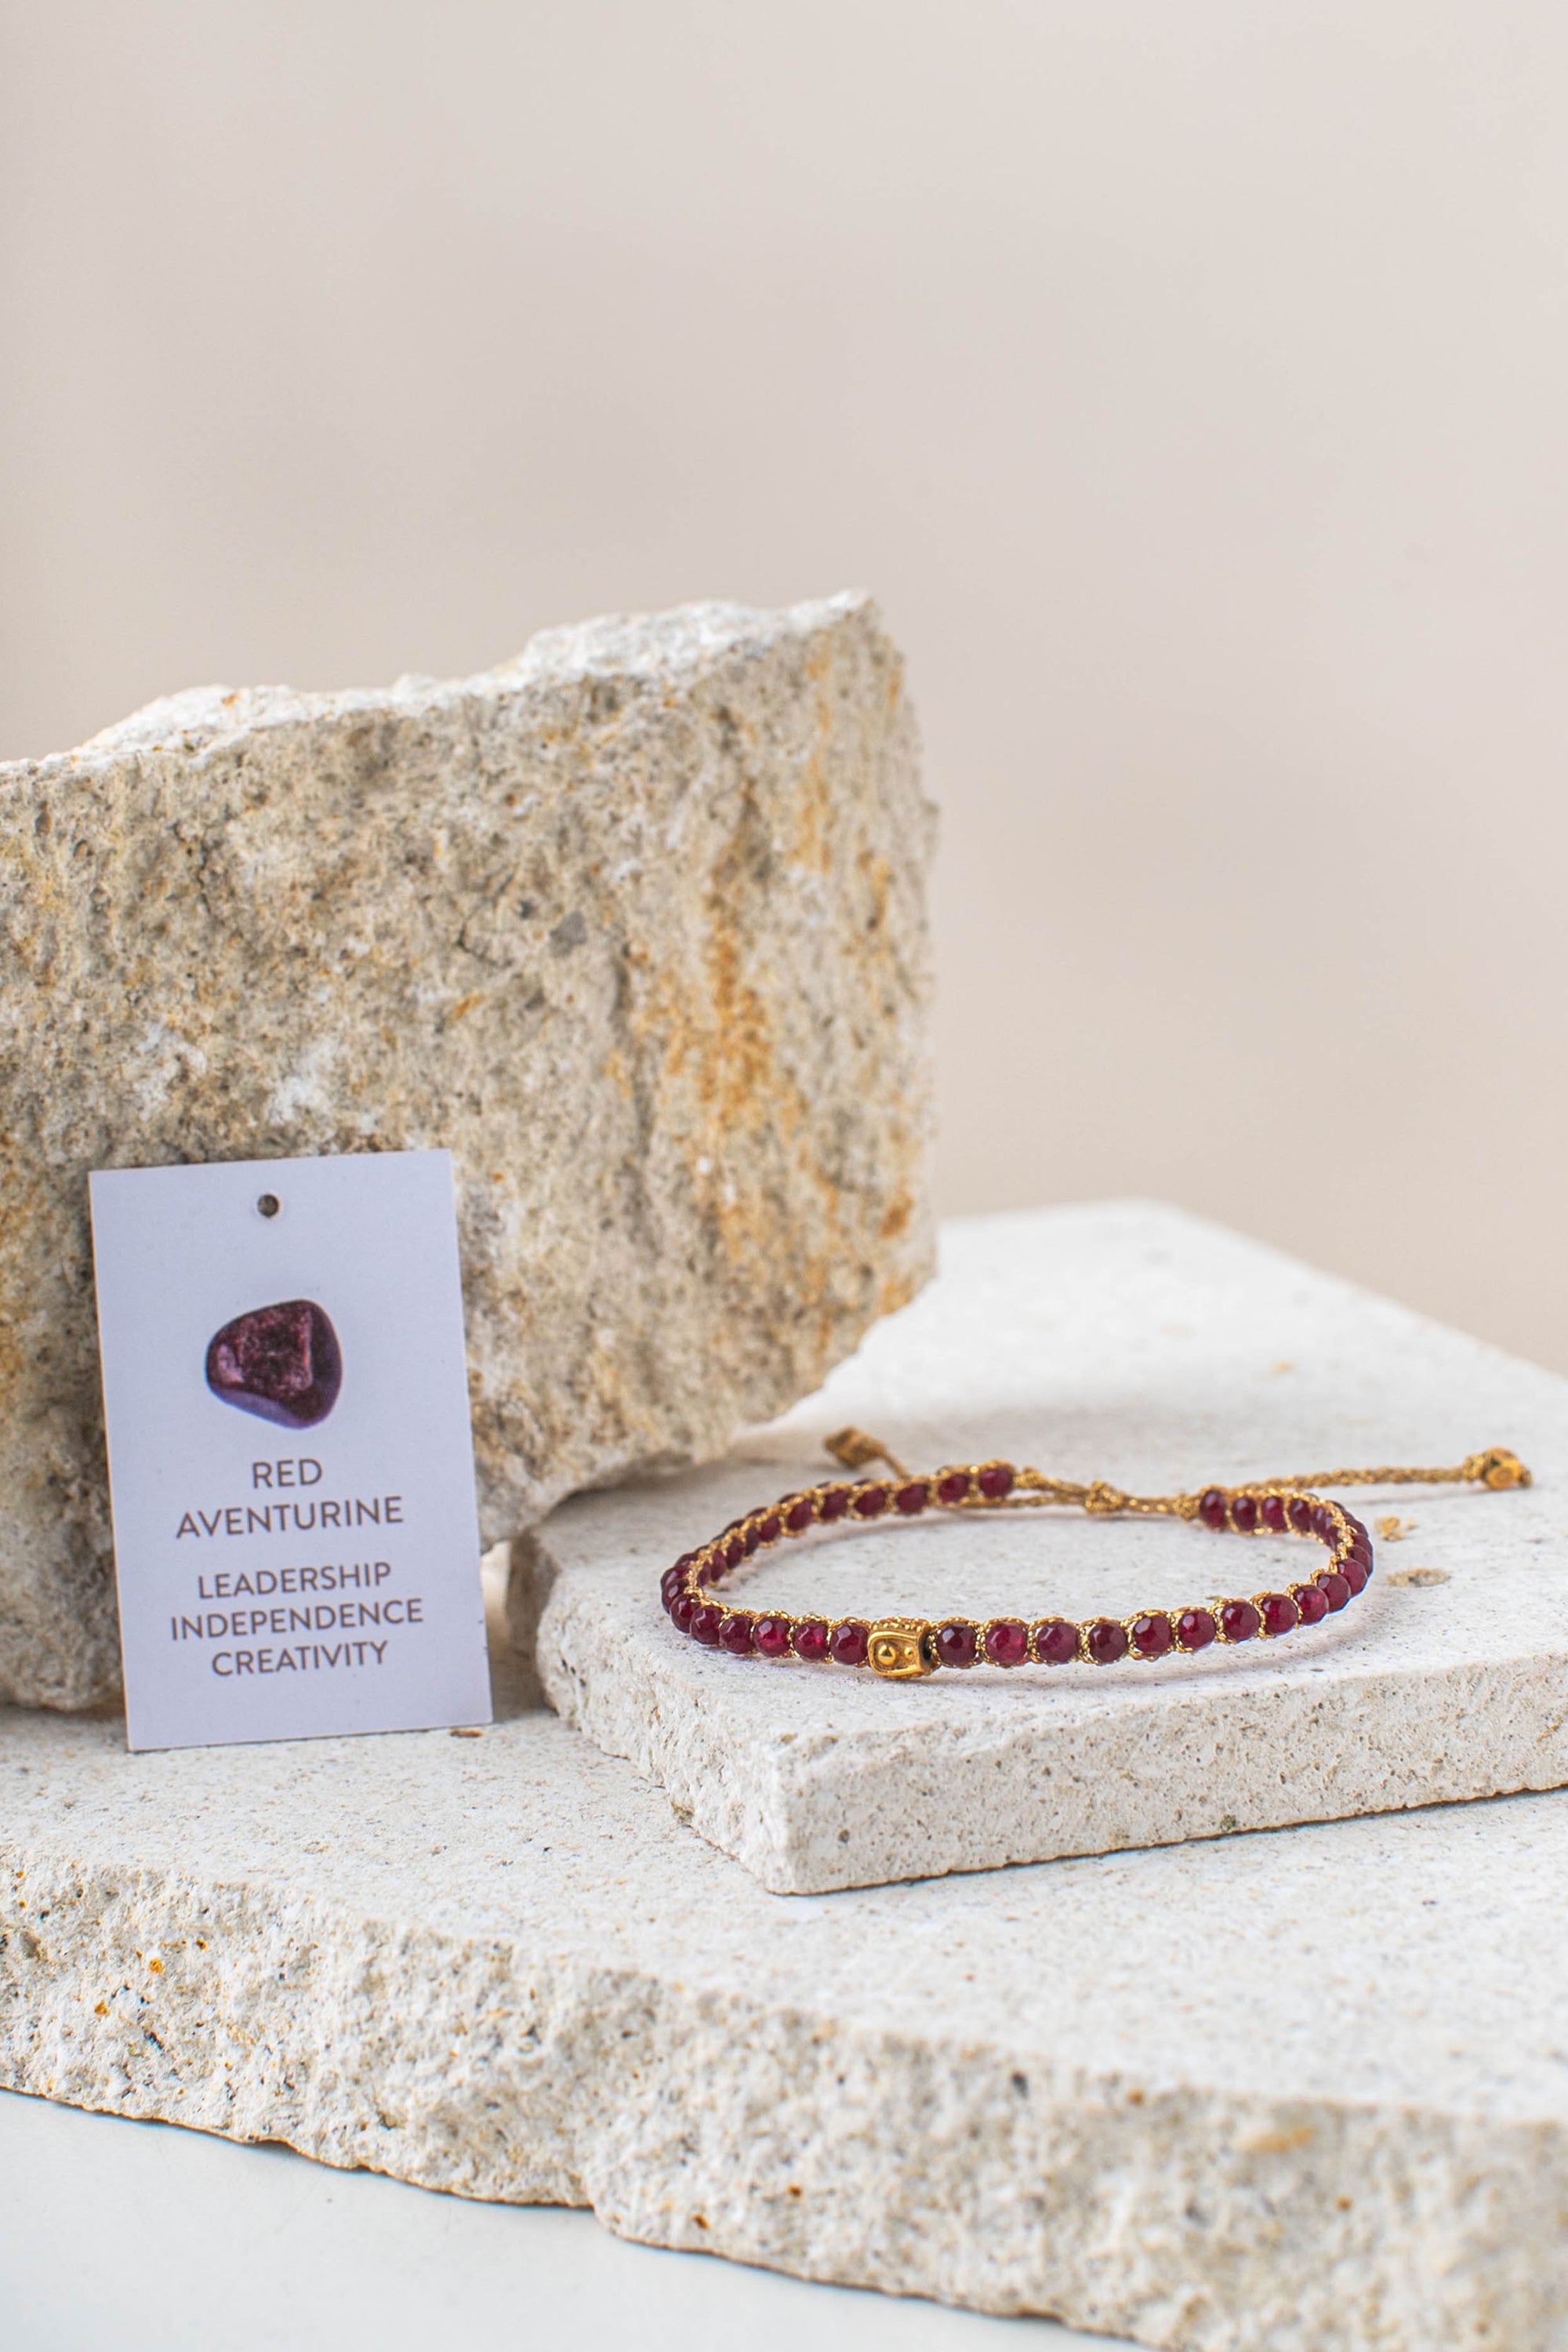 Red Aventurine Stone Bracelet For Leadership, Independence And Creativity